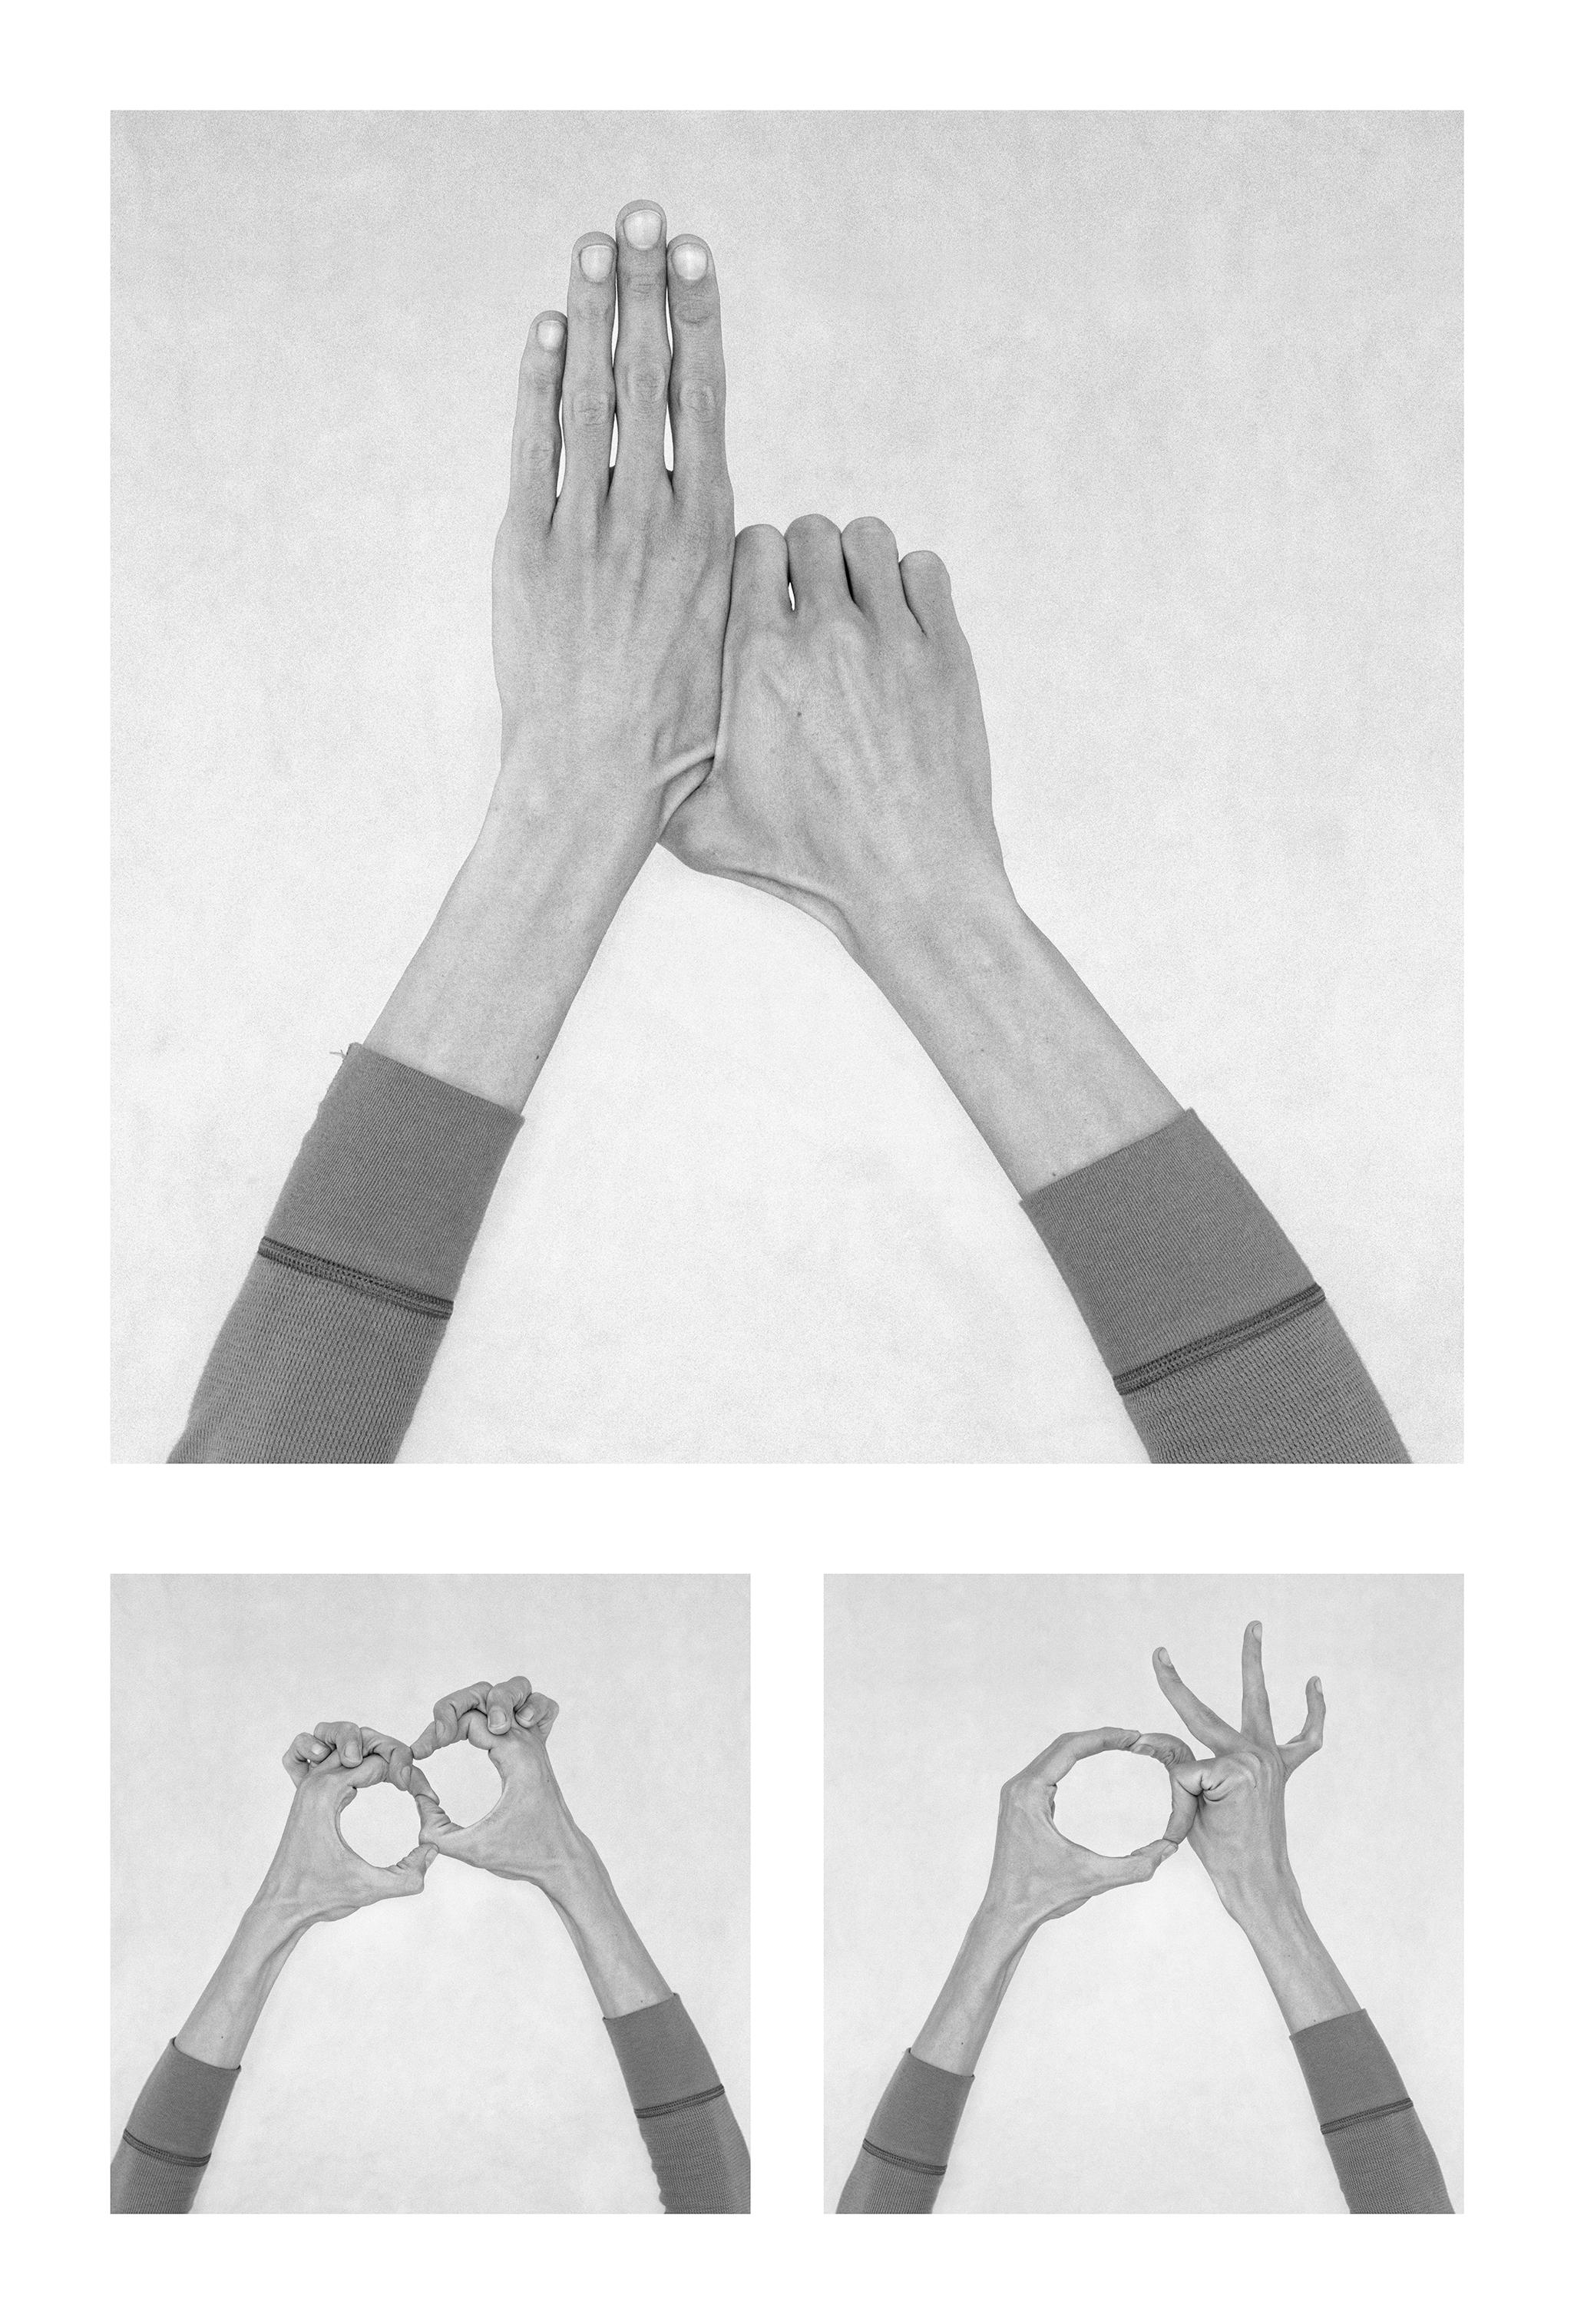 Nico Baixas / Gos-com-fuig Figurative Photograph - Untitled XXXVIII, XXXIX and Untitled XXXII. Hands. From the Series Chiromorphose